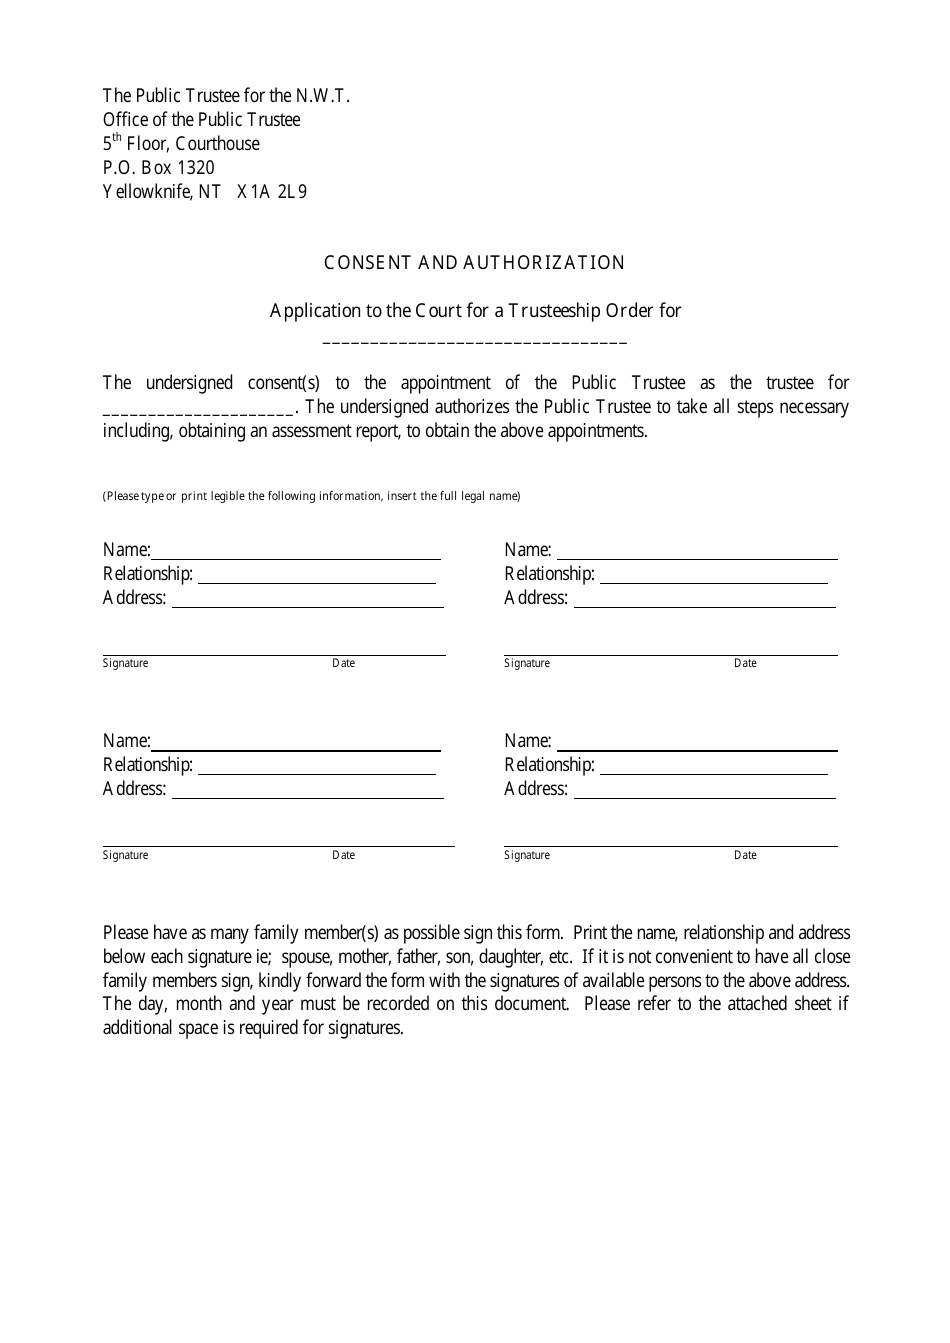 Consent and Authorization Application to the Court for a Trusteeship Order - Northwest Territories, Canada, Page 1